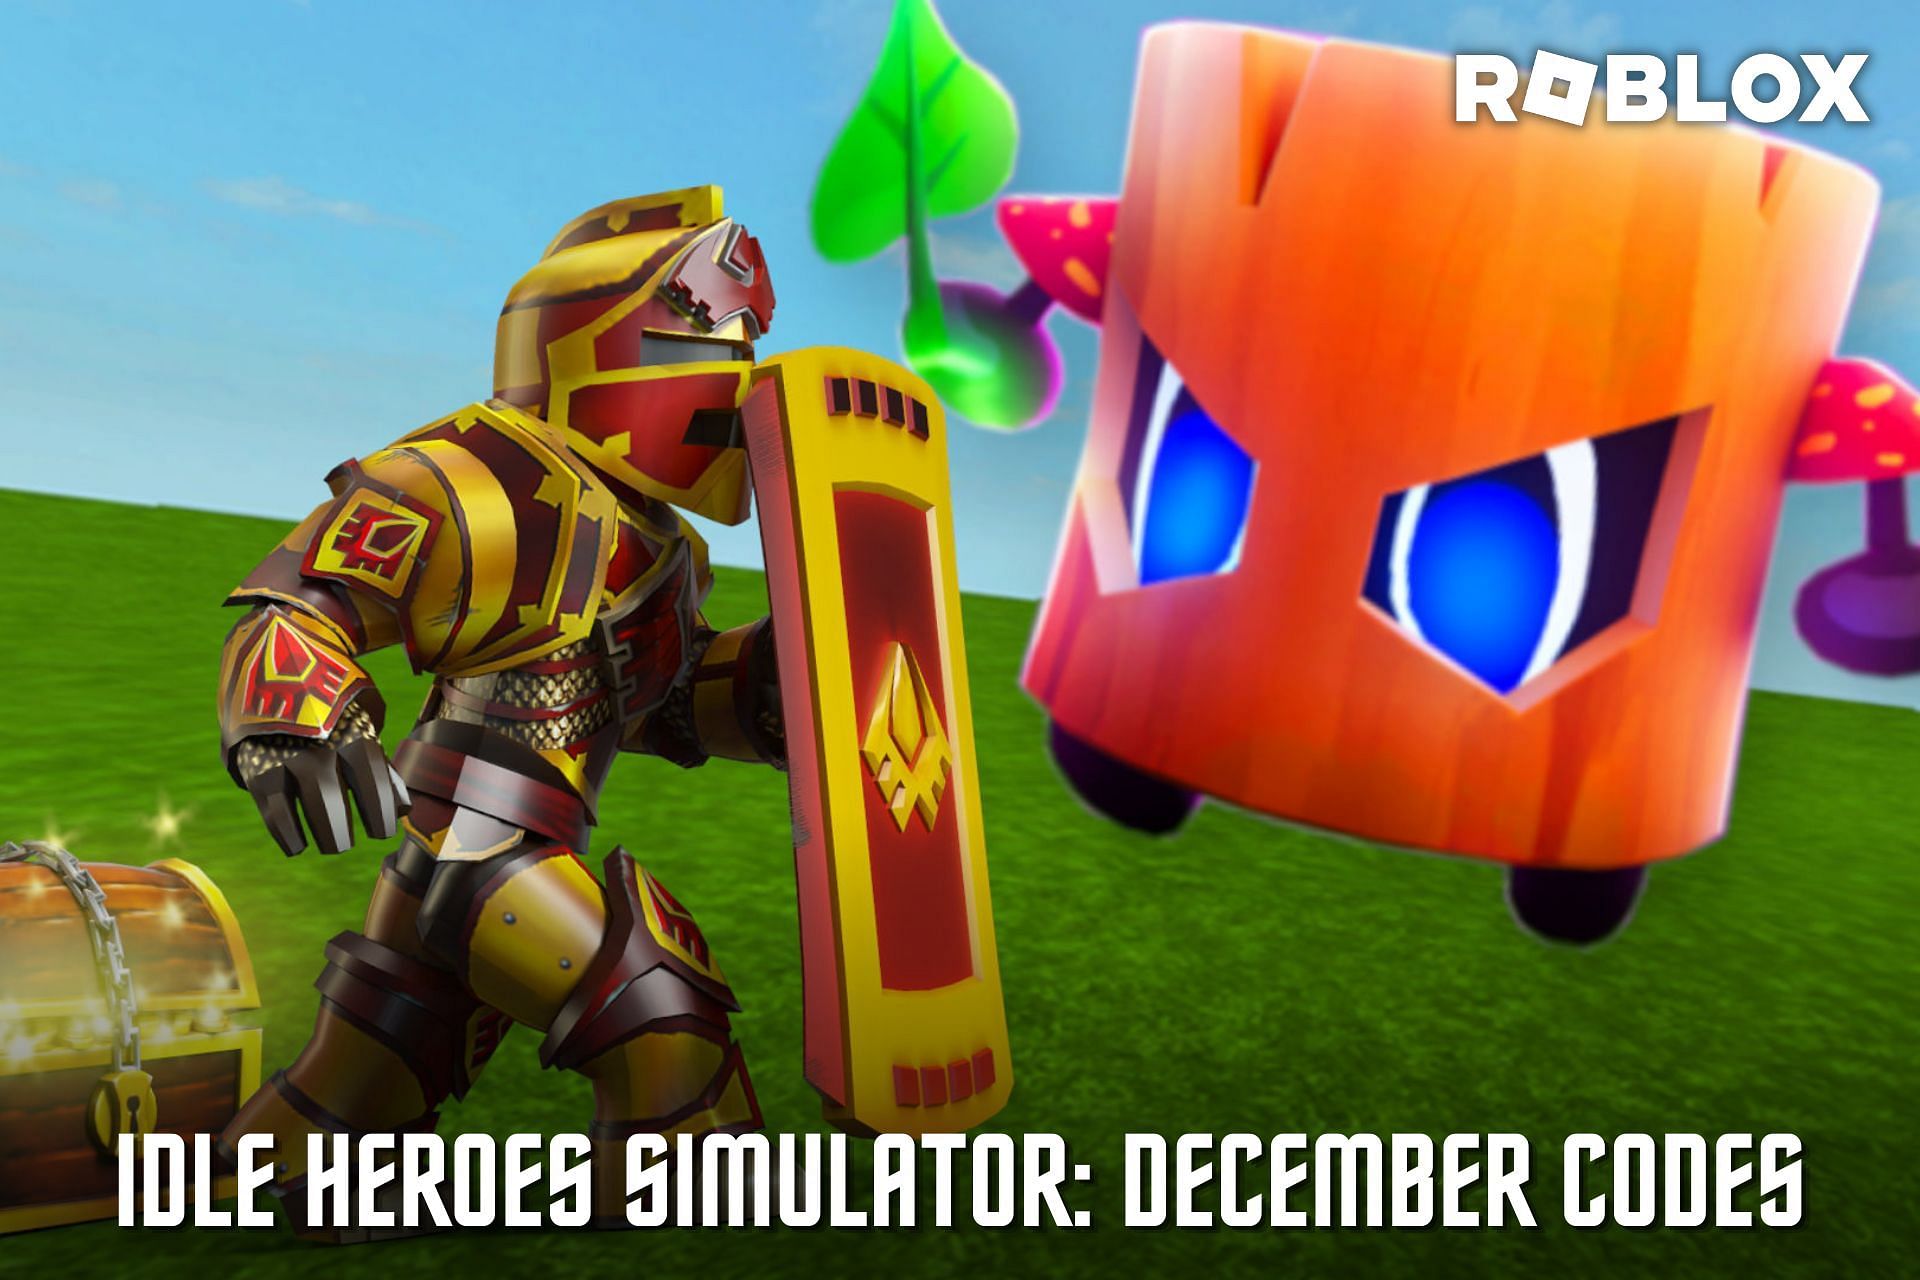 Roblox Clicker Simulator codes (December 2022): How to get free